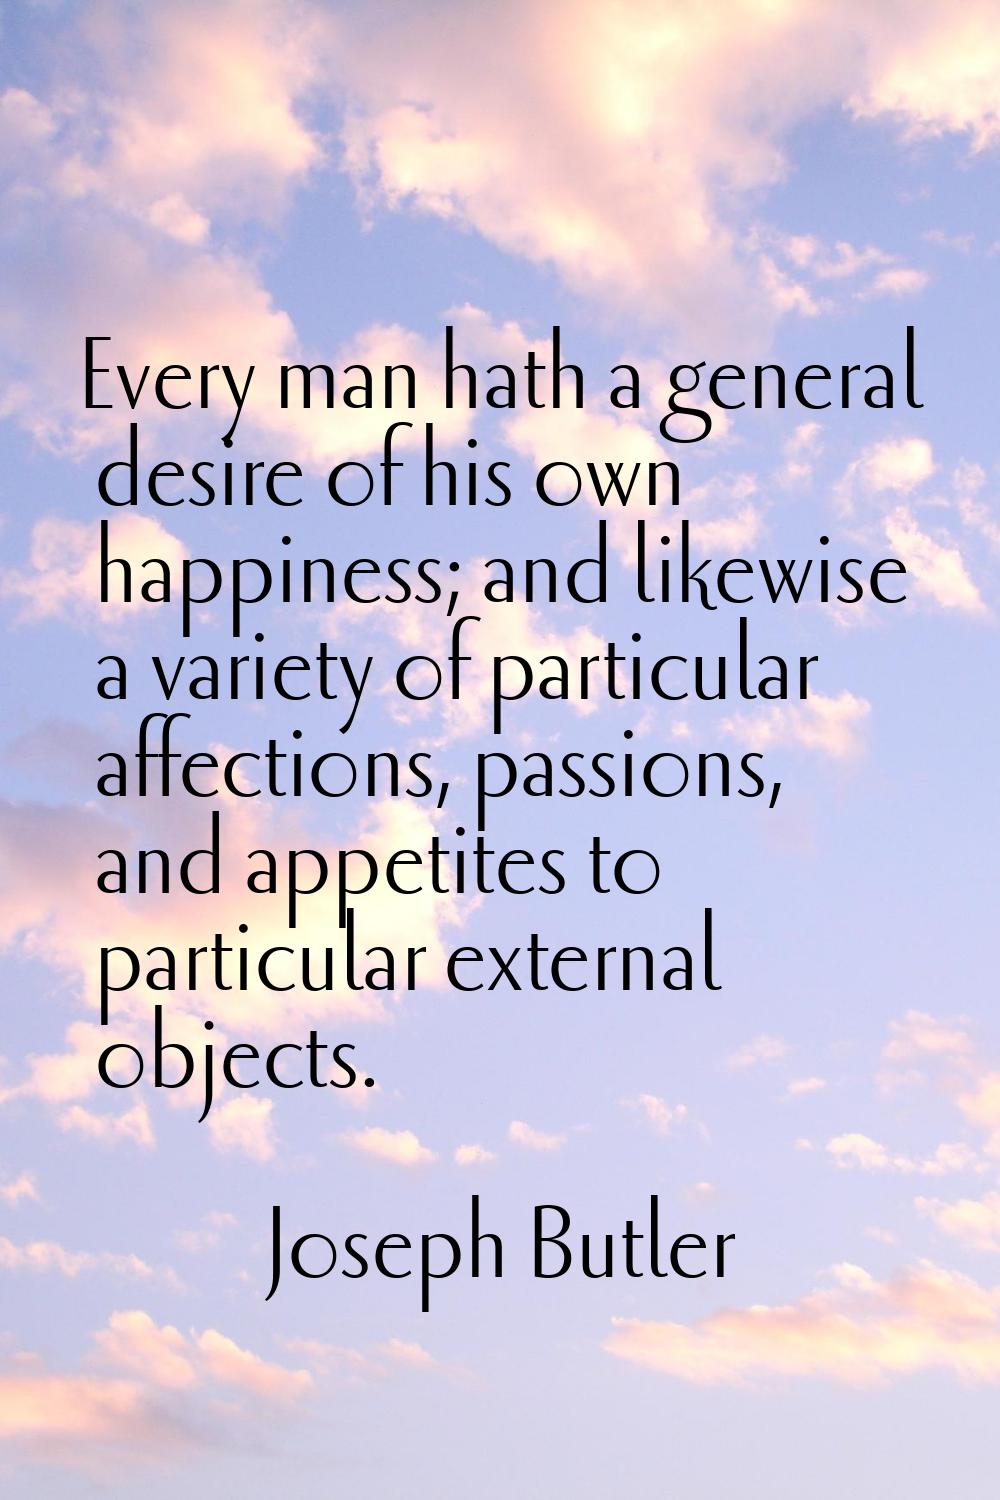 Every man hath a general desire of his own happiness; and likewise a variety of particular affectio